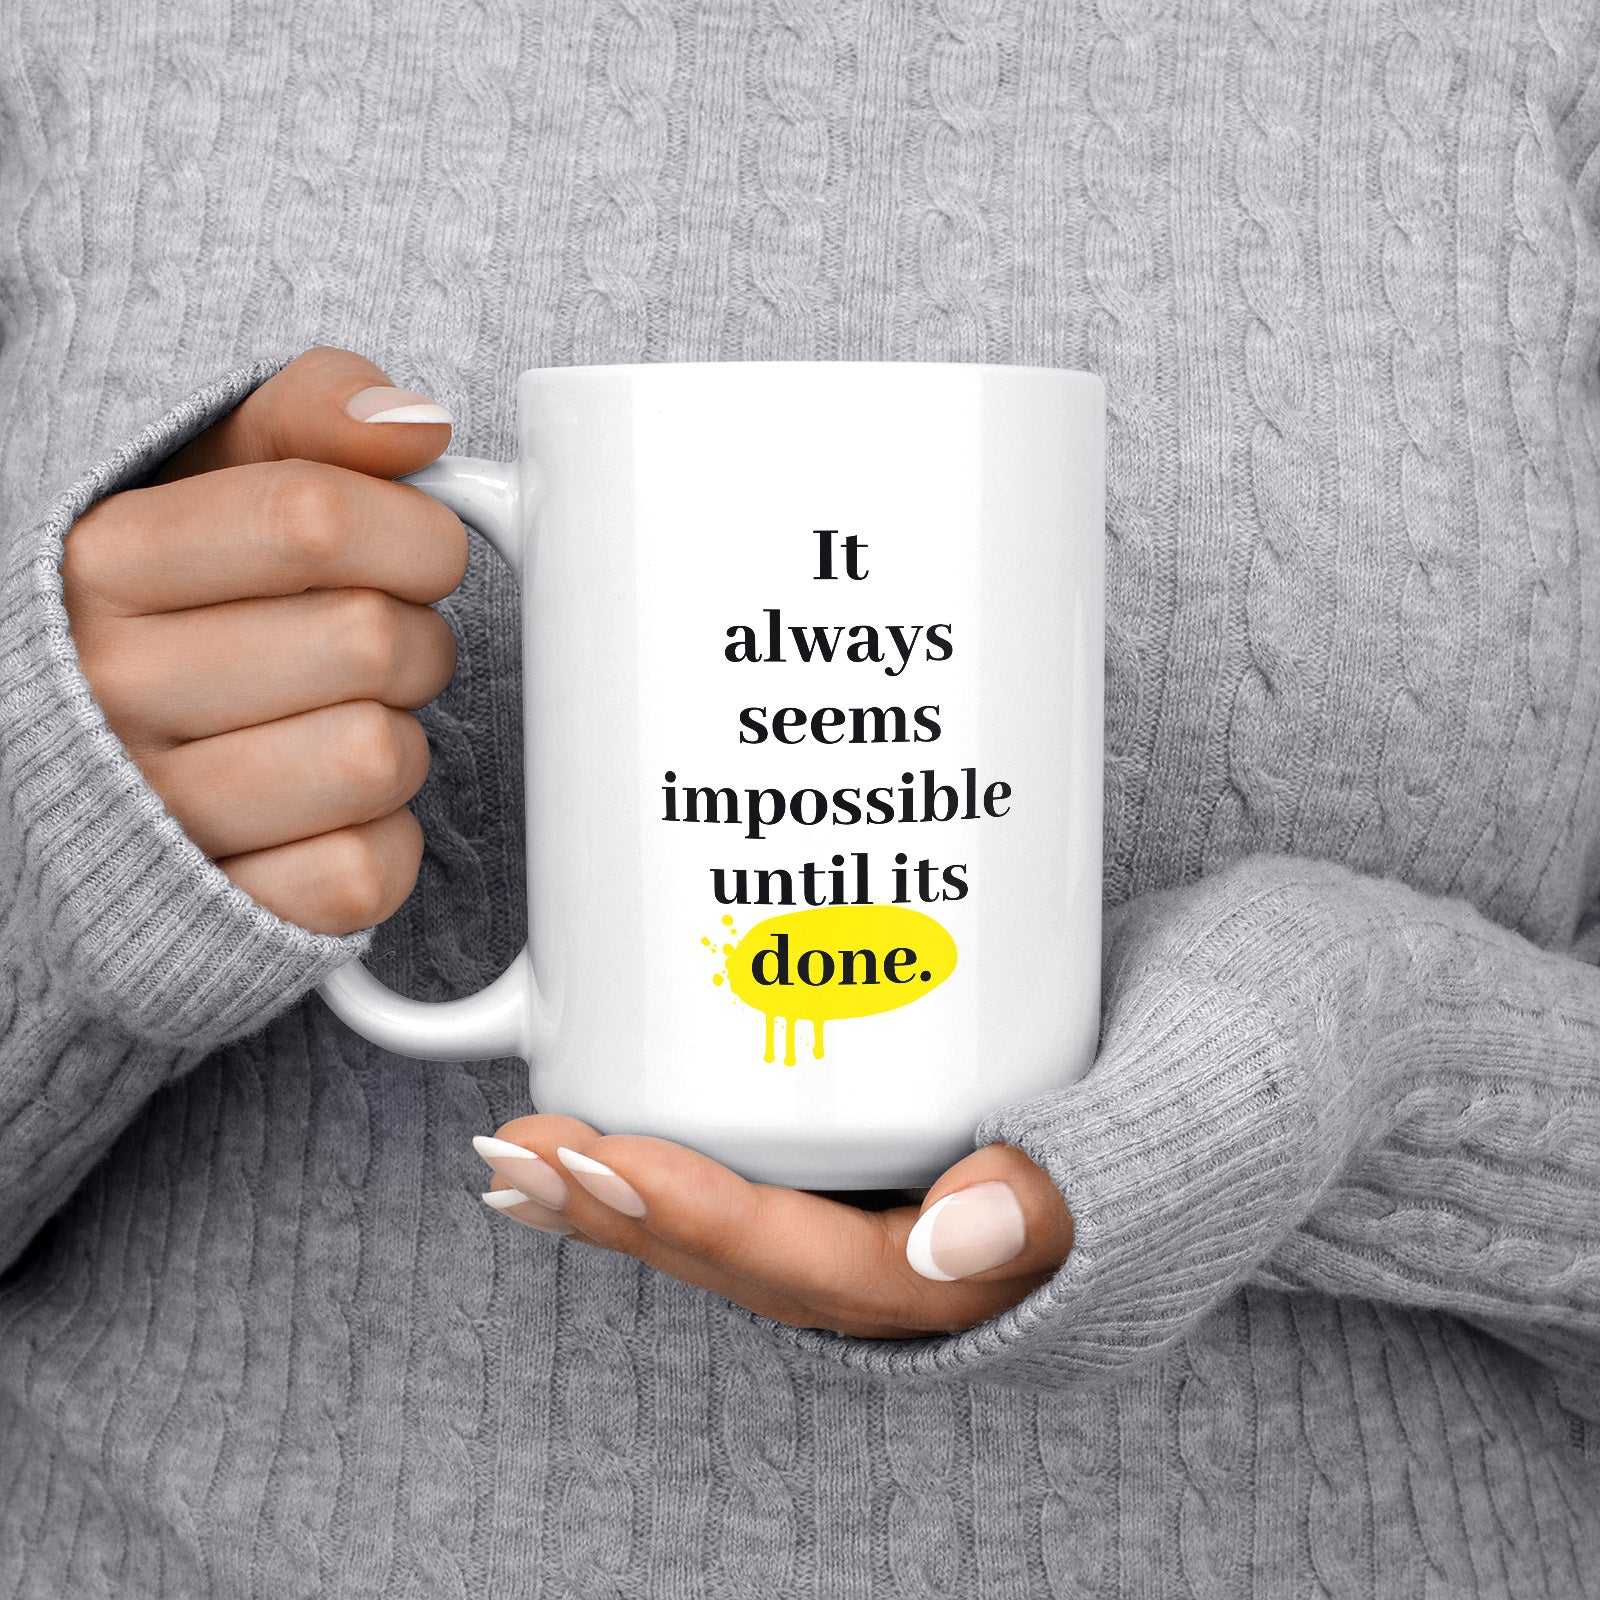 Be inspired by Nelson Mandela's famous quote, "It always seems impossible until it's done" on this white and glossy 15oz coffee mug with the handle on the left.